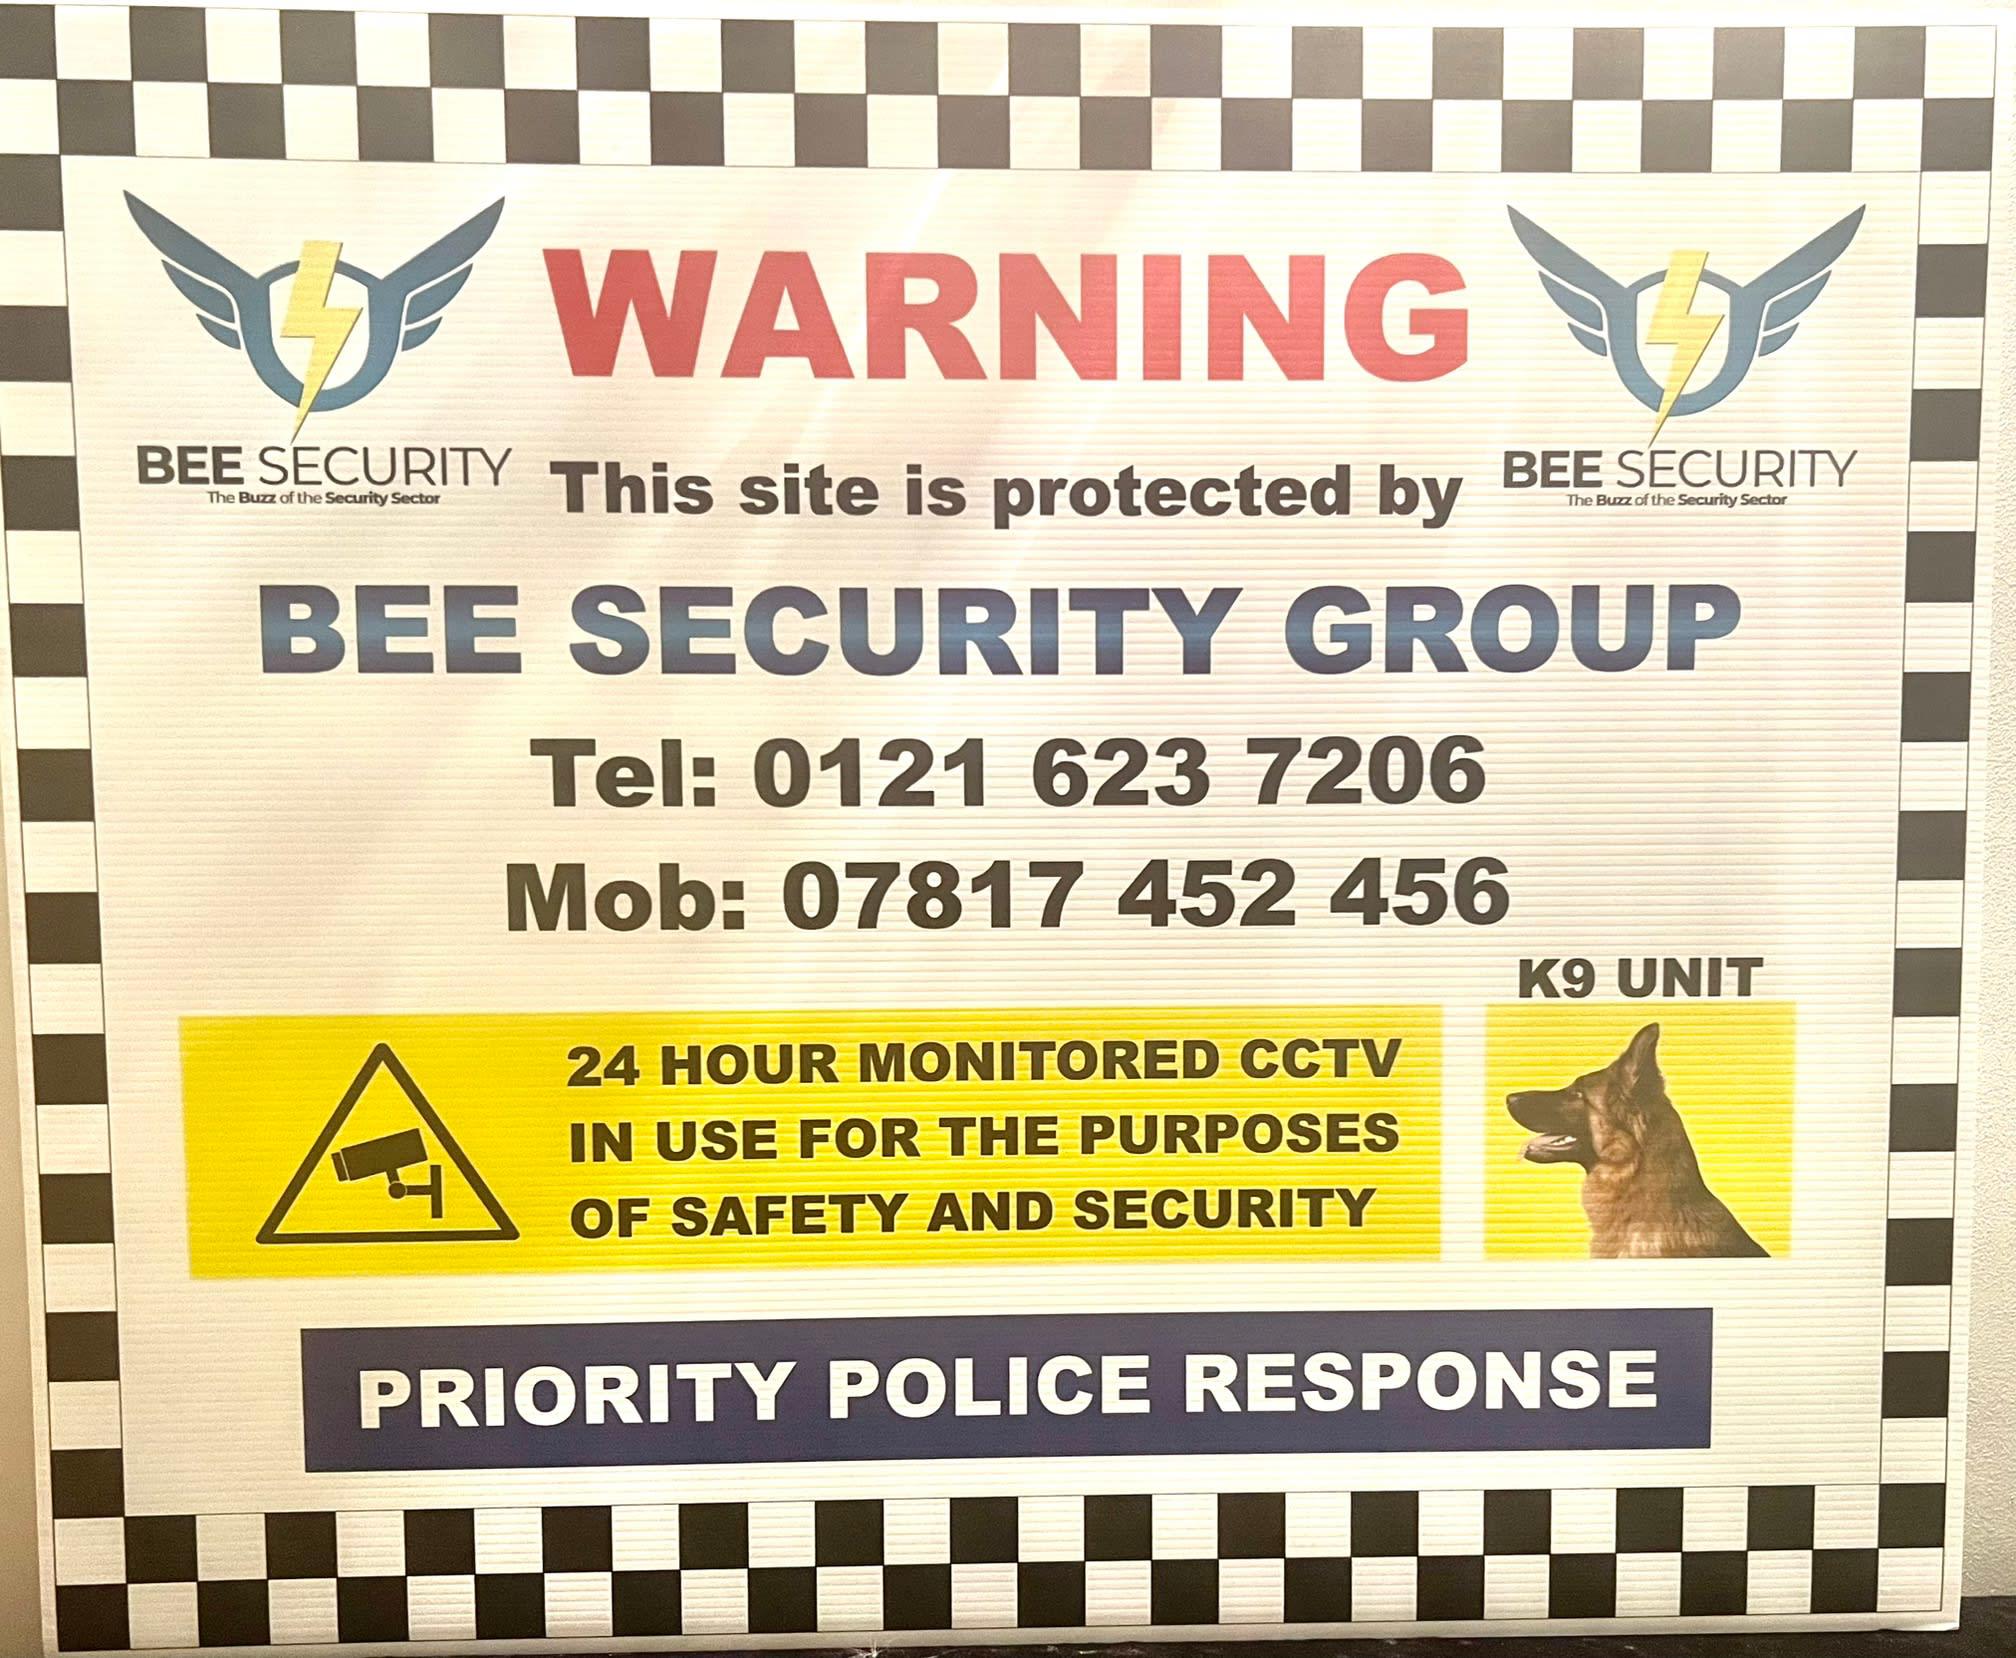 Images Bee Security Group Ltd